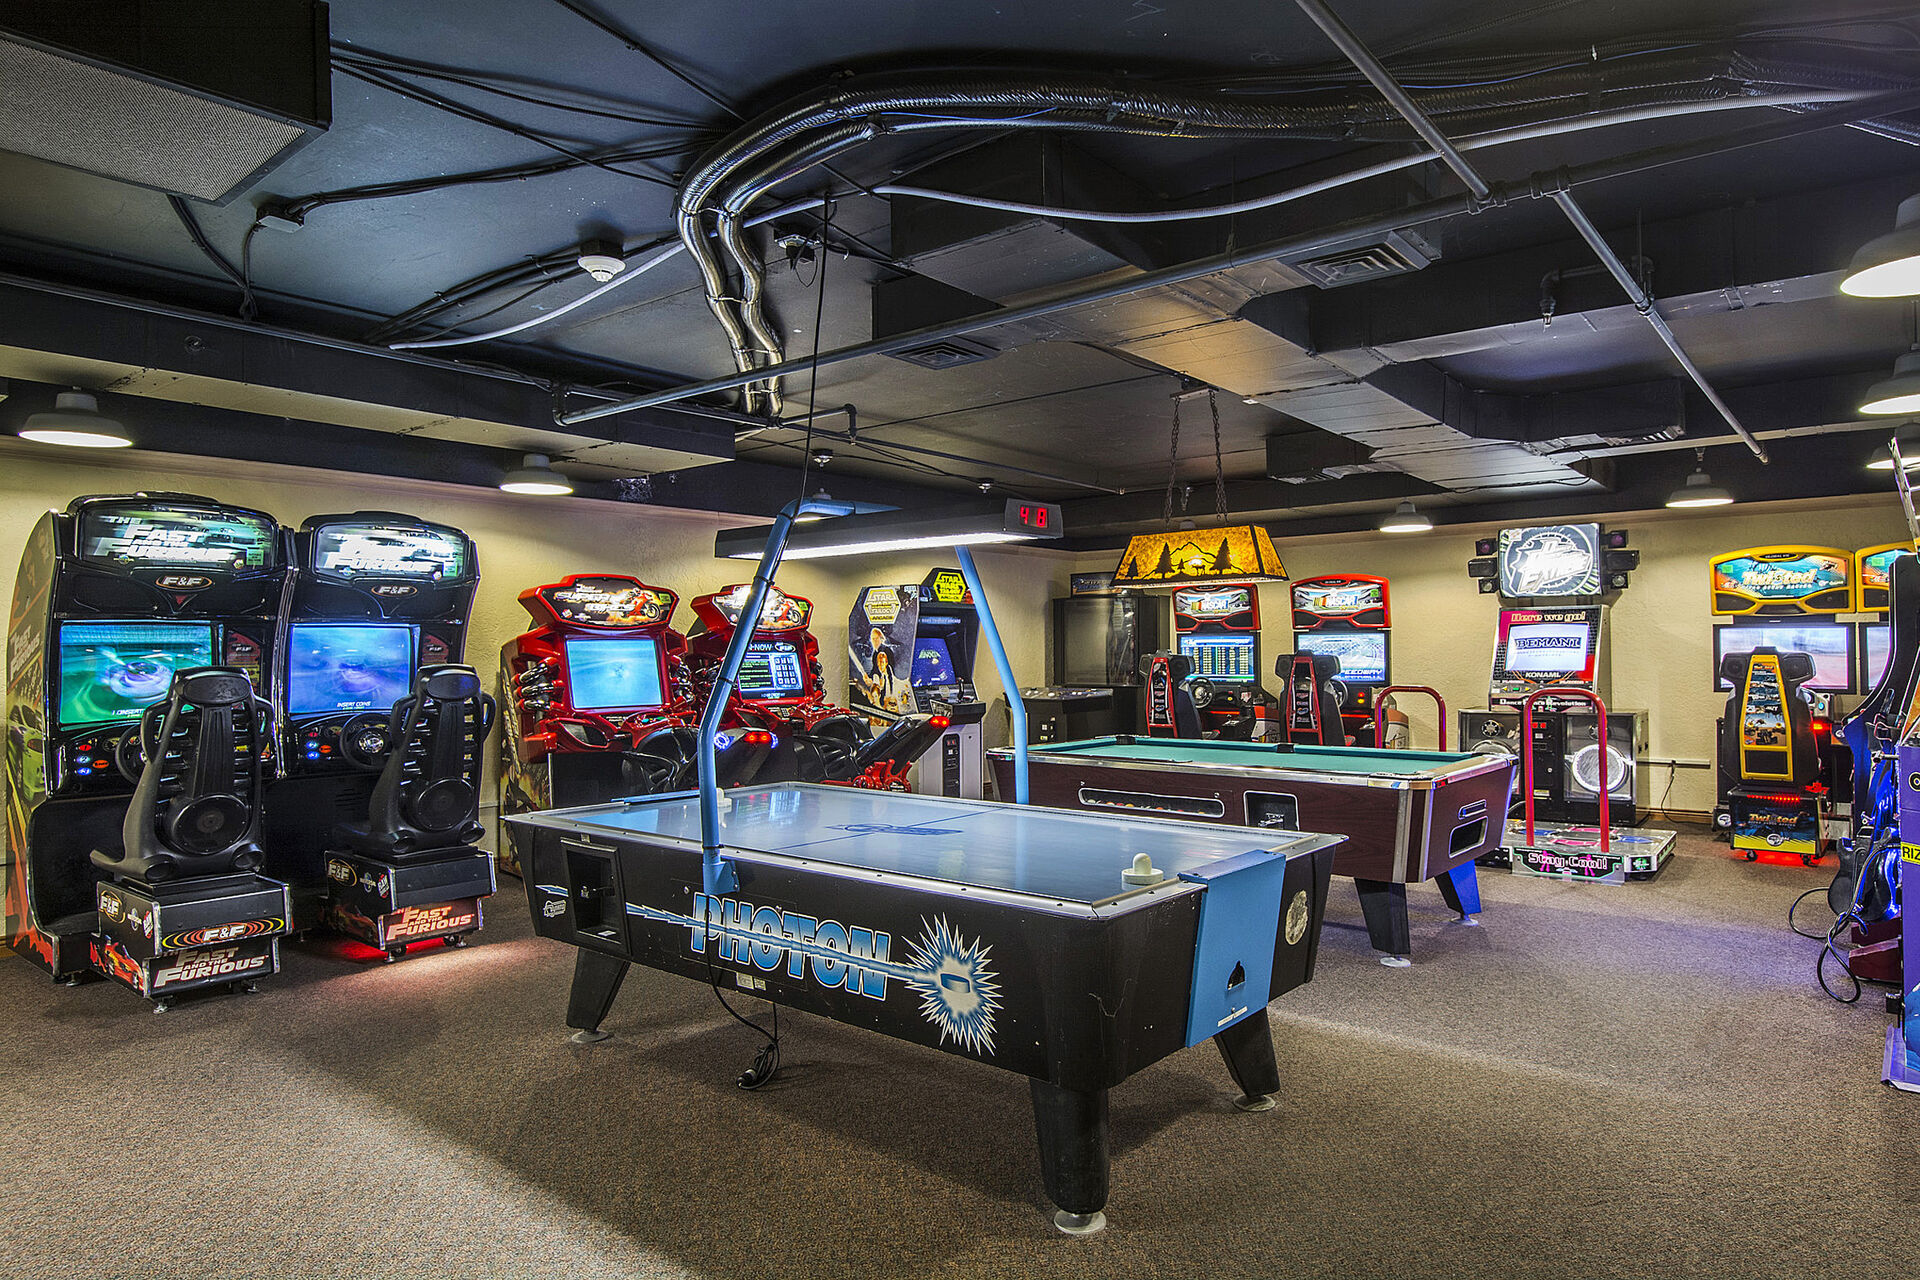 Arcade and game room